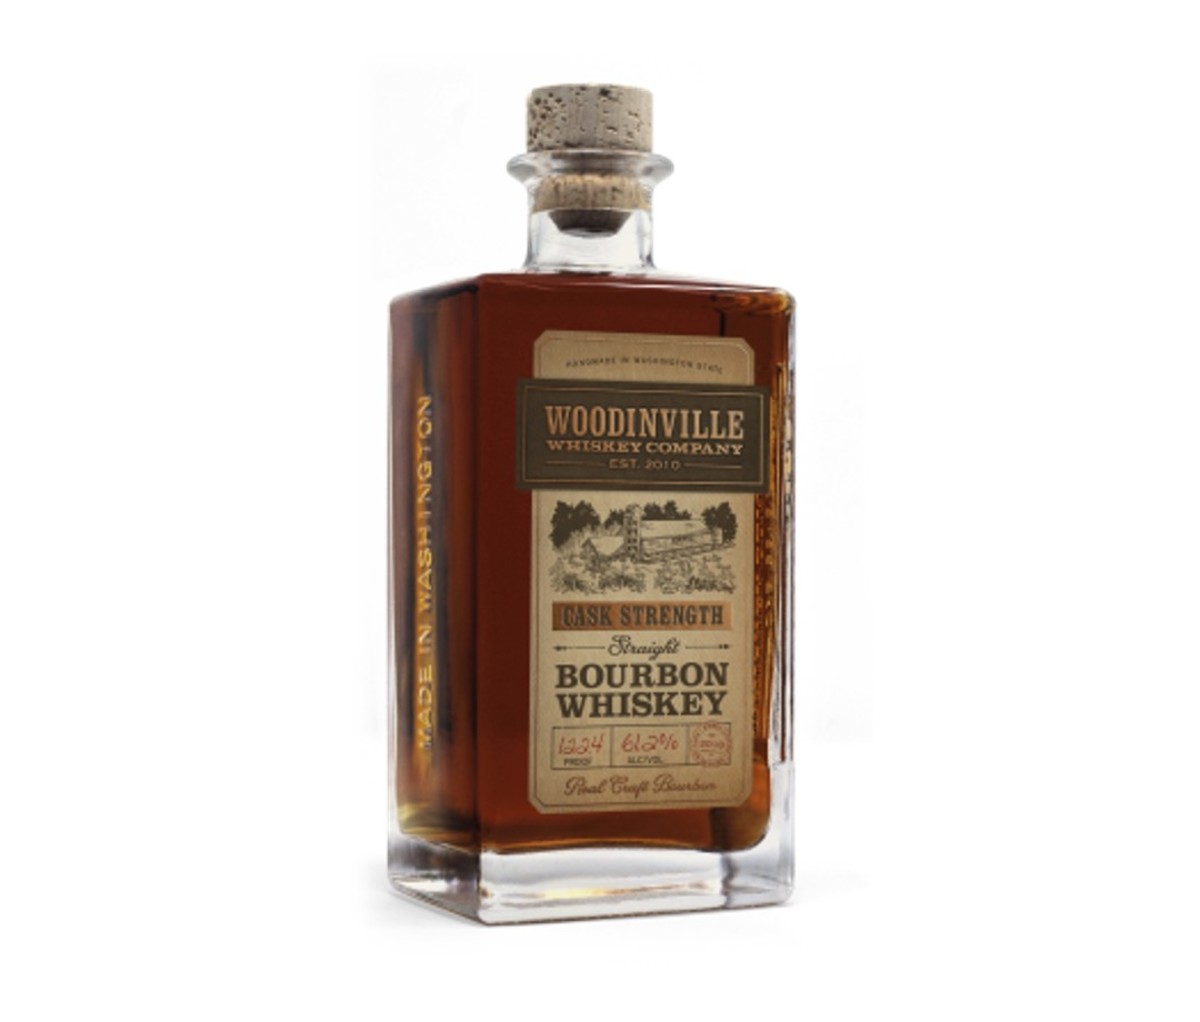 A bottle of Woodinville Cask Strength Straight Bourbon Whiskey.